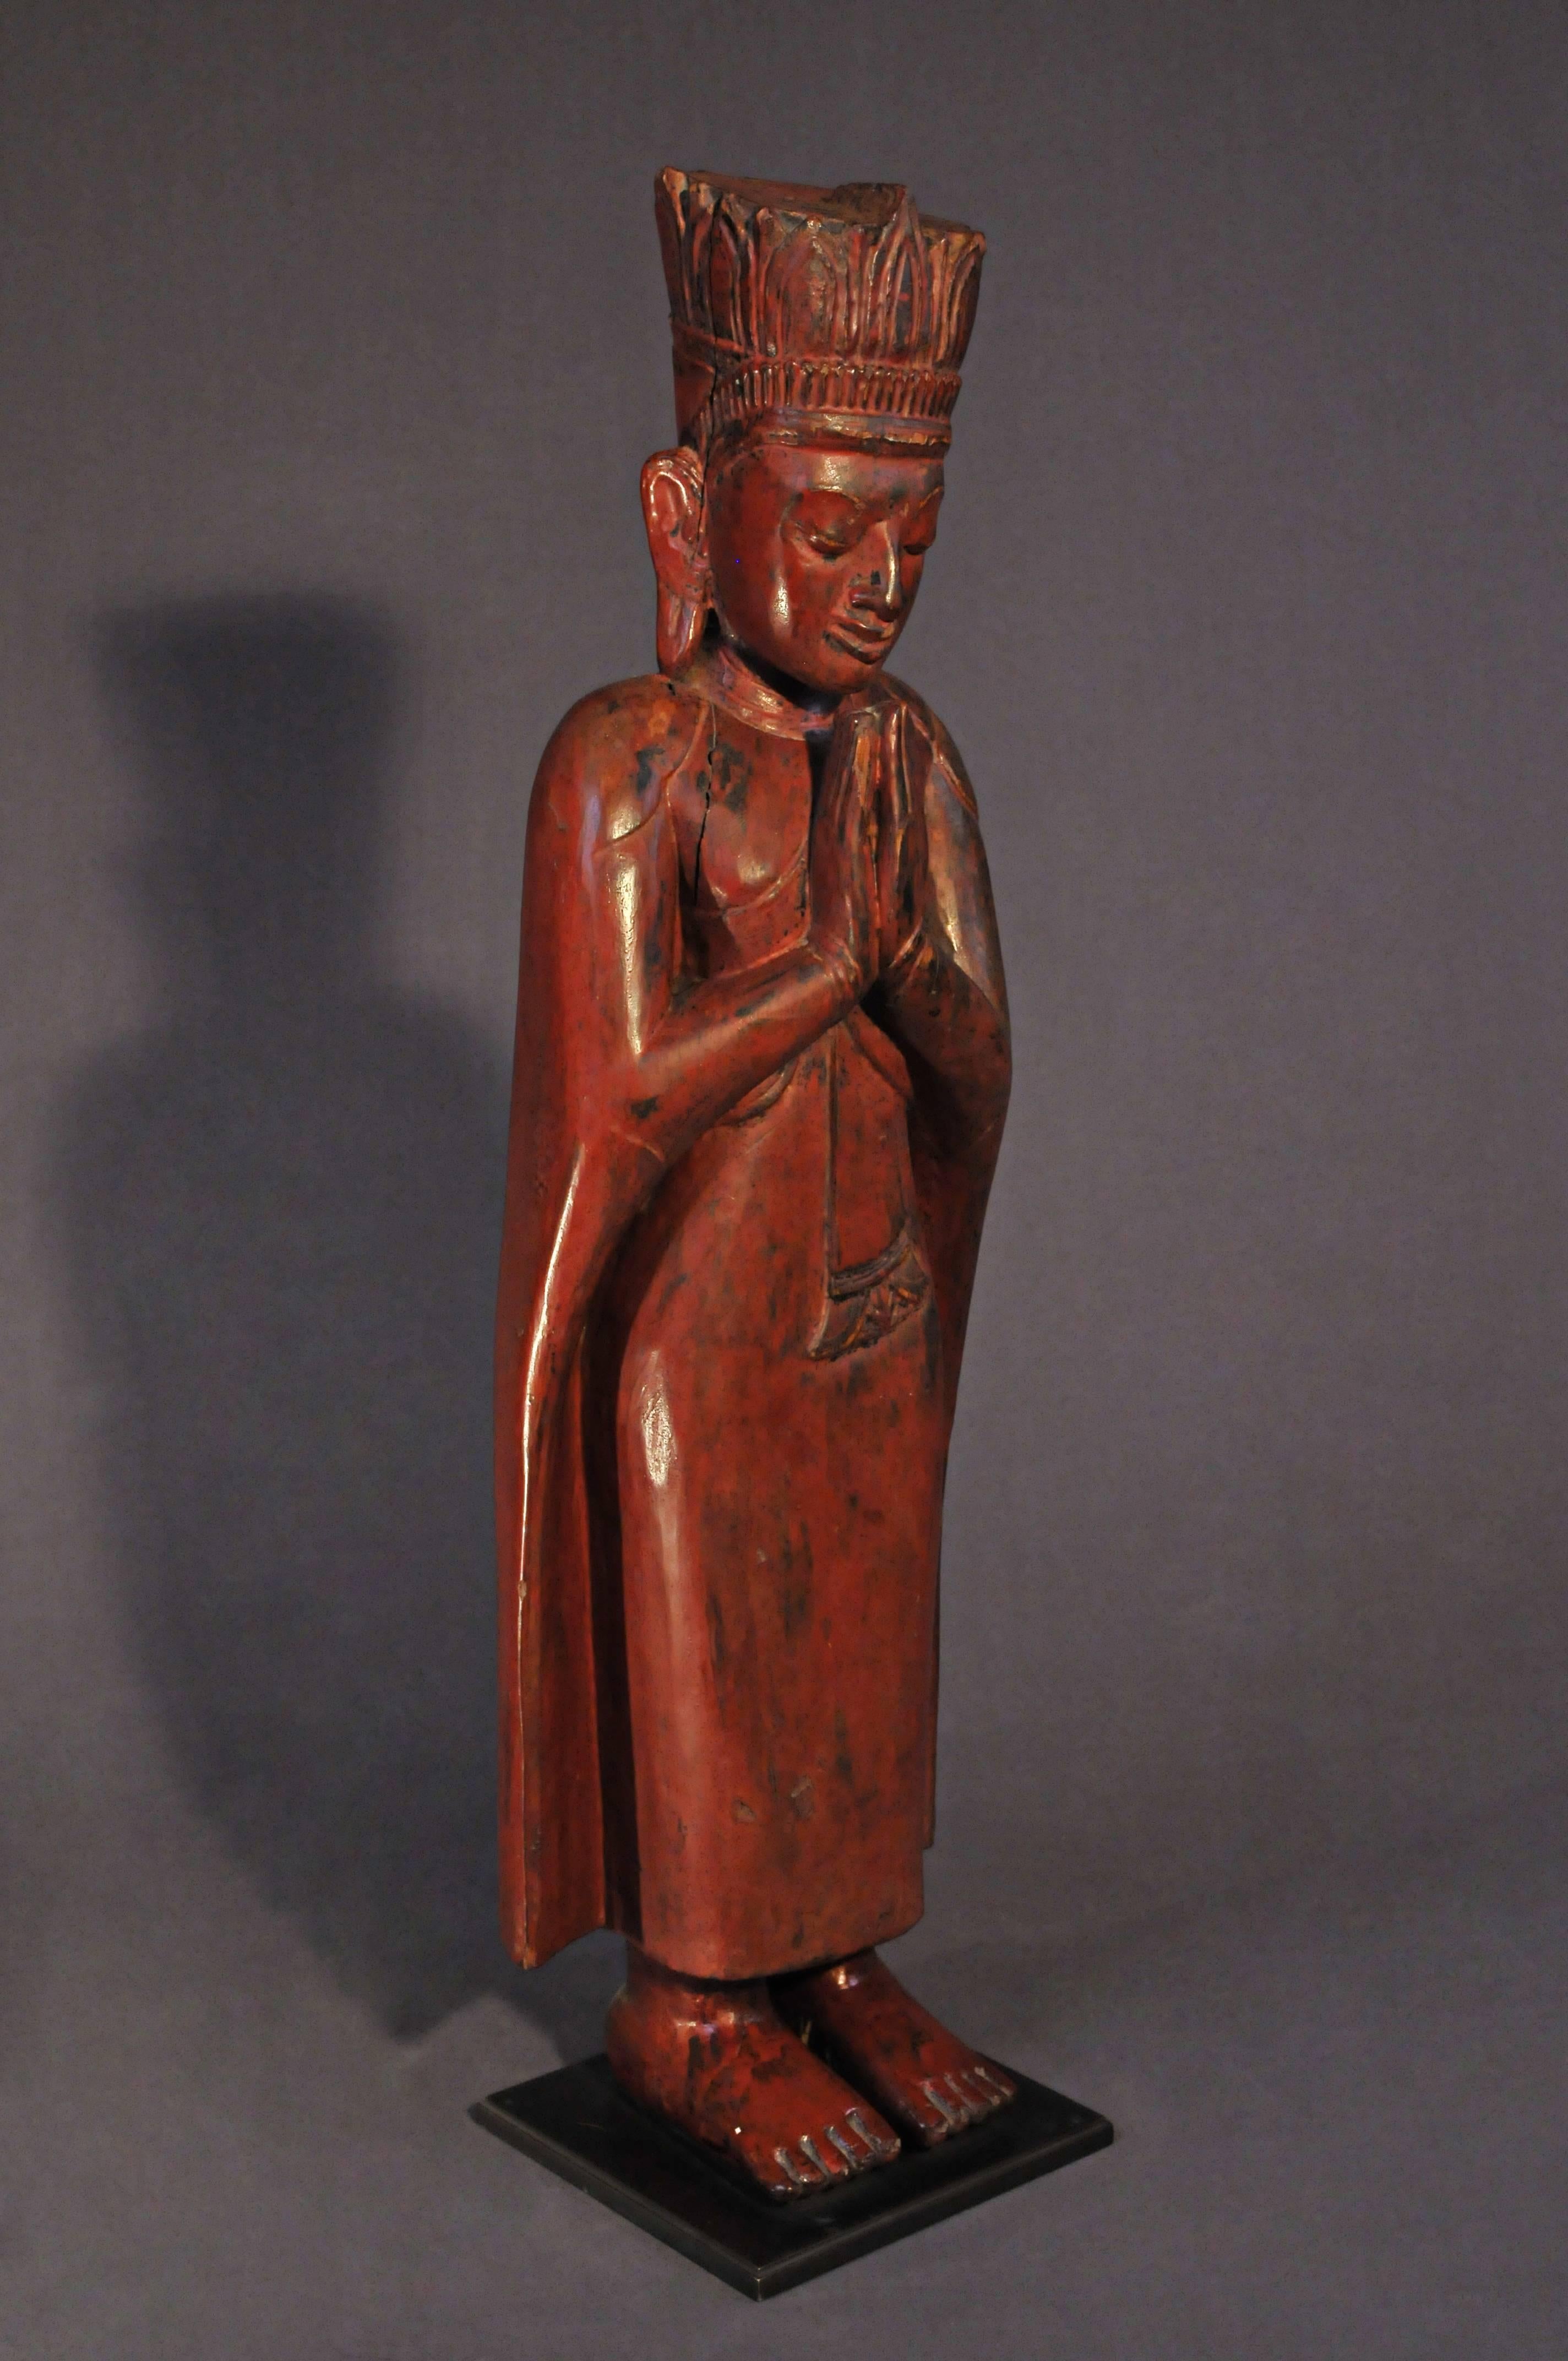 16th Century, Lacquered Wood Standing Monks in Anjali Mudra, Pagan Period, Burma 1